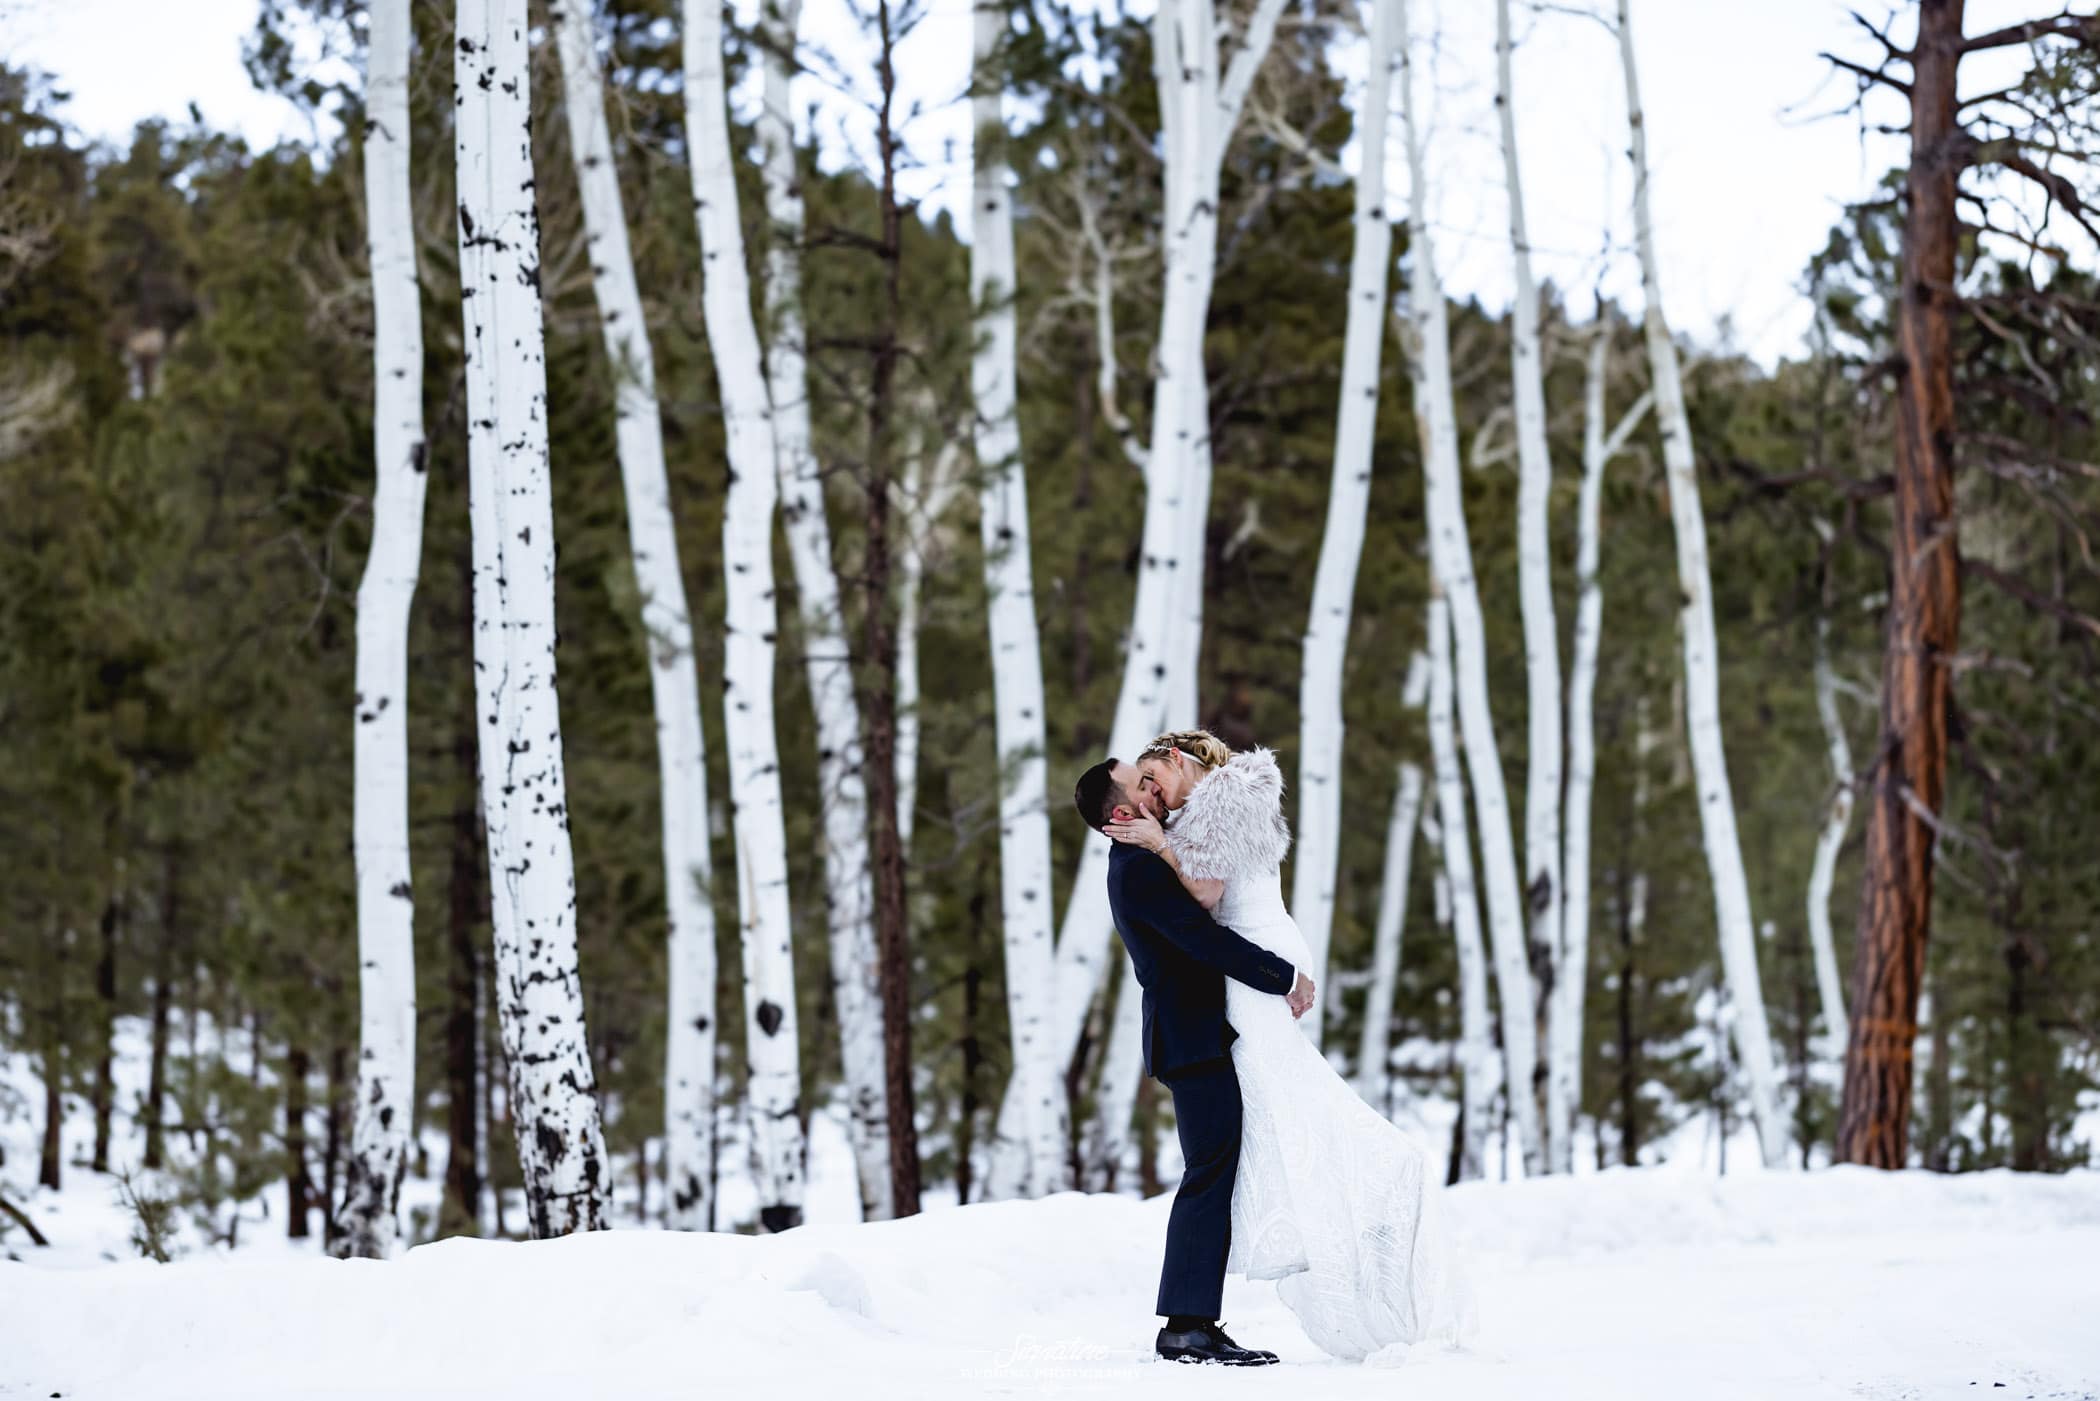 Groom picking up bride and kissing in forest with snow